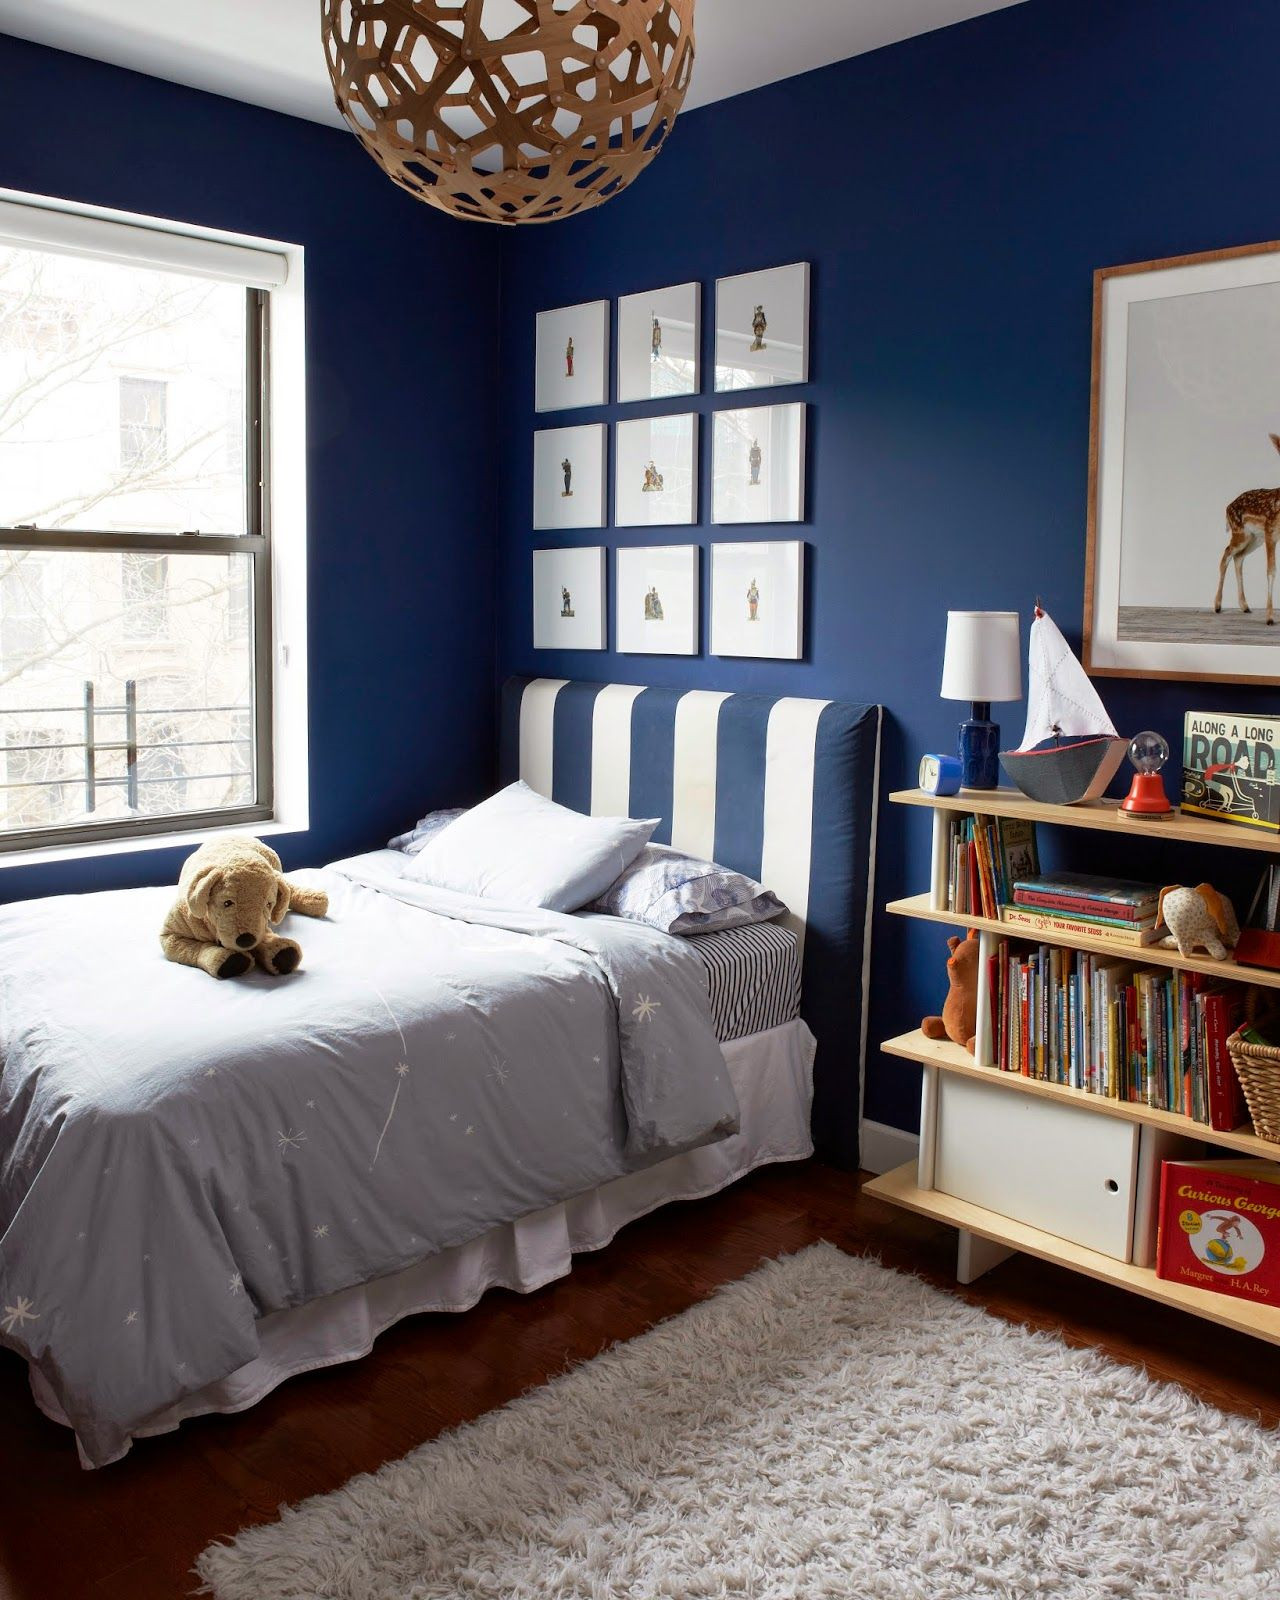 Painting Ideas For Boy Bedroom
 Help Which Bedroom Paint Color Would You Choose